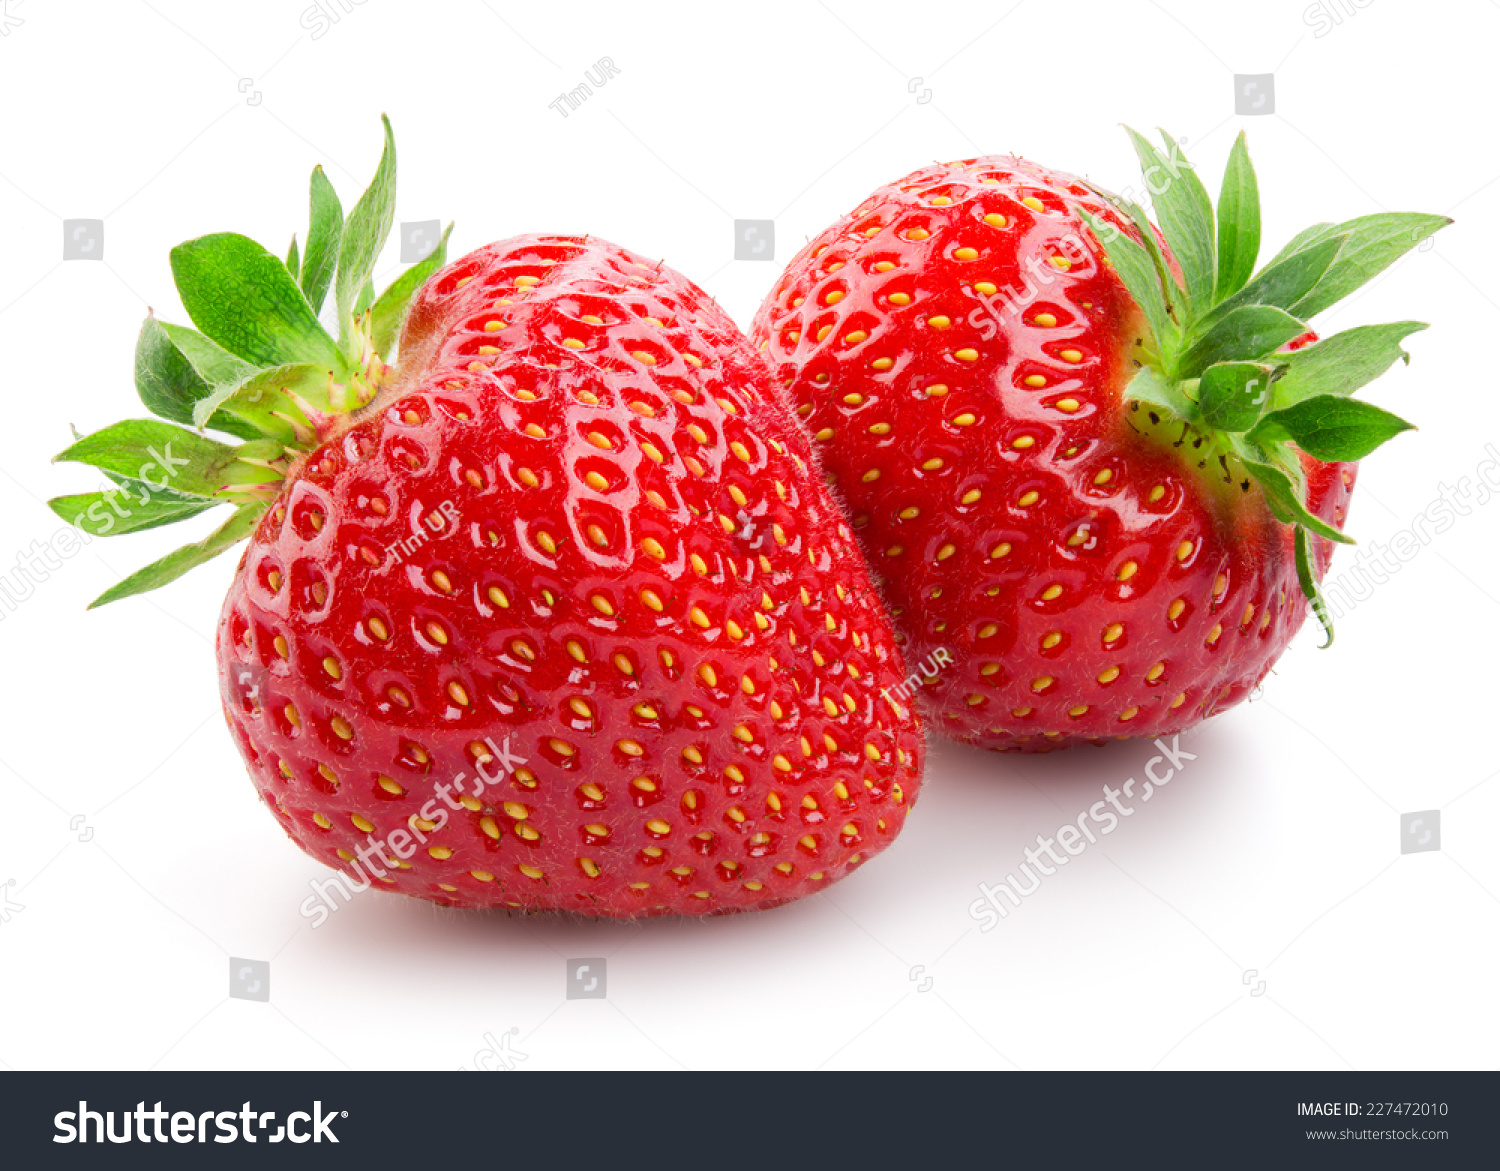 Two strawberries close up on white background #227472010